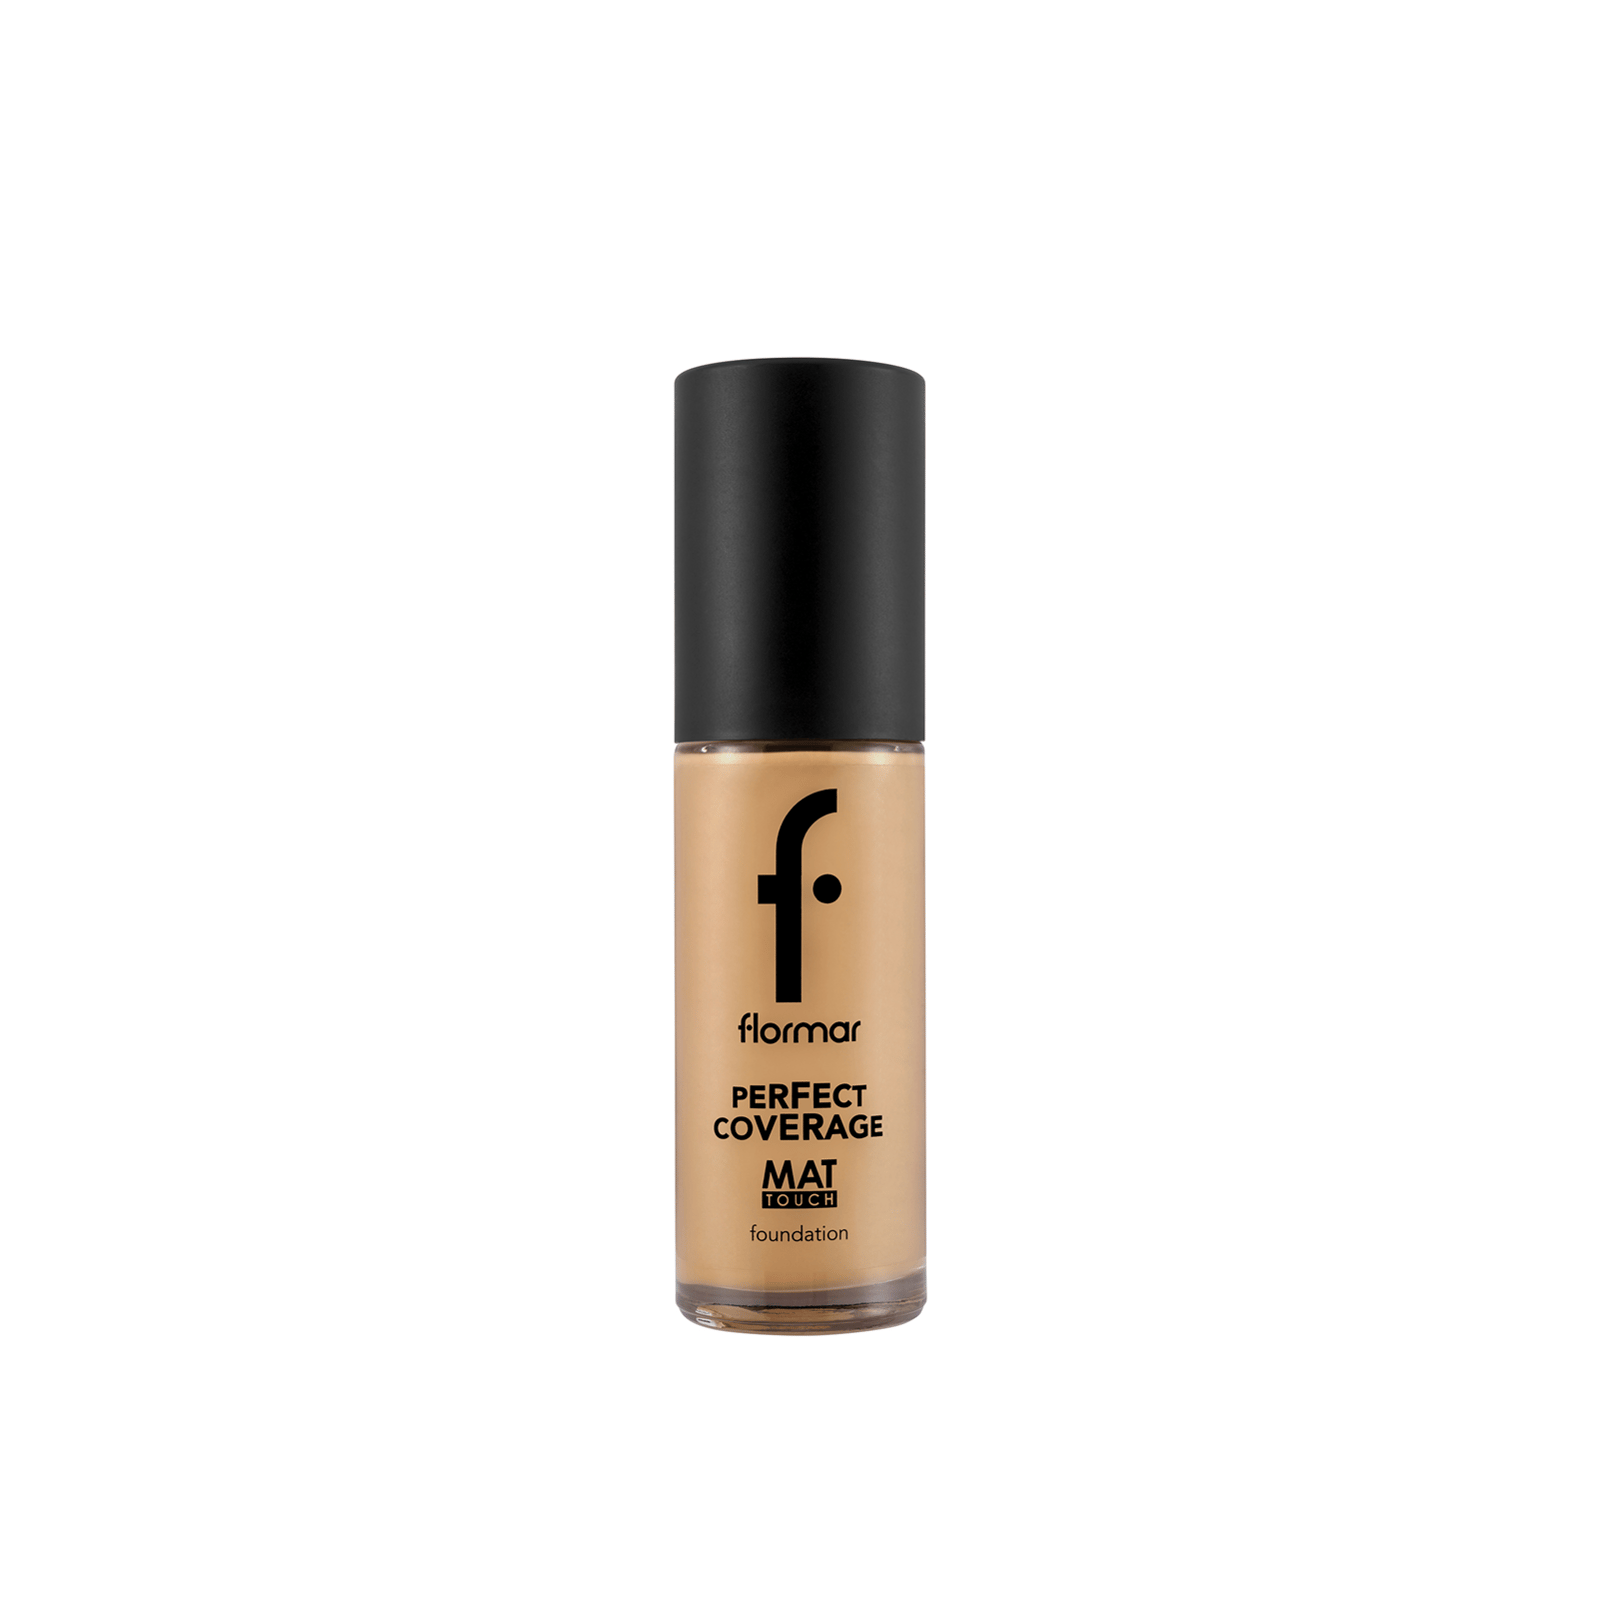 Flormar Perfect Coverage Mat Touch Foundation 324 Hazel 30ml